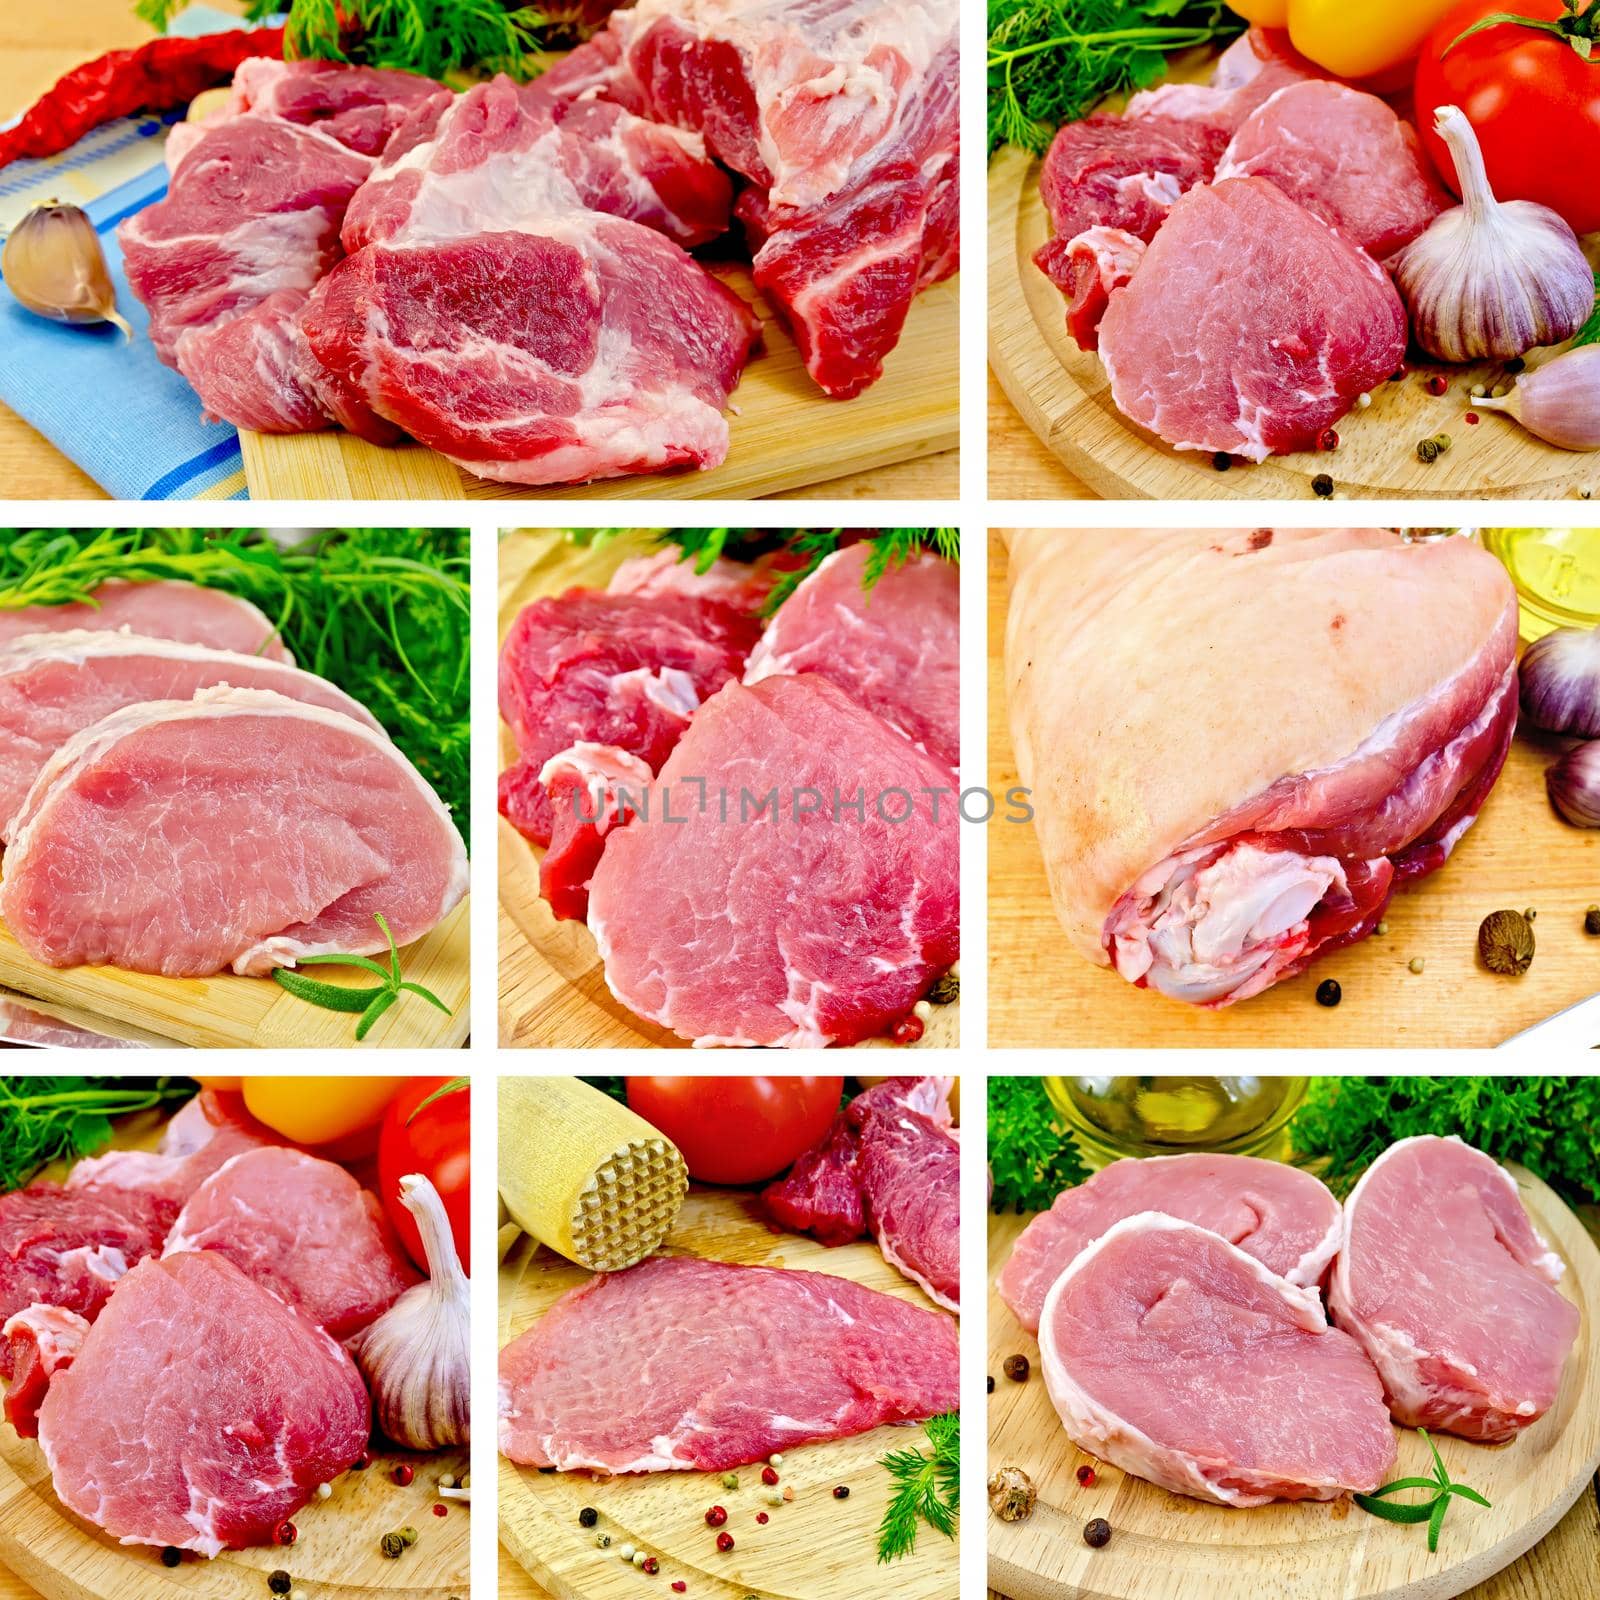 Collection of images of pork, knuckle, garlic, napkin, parsley, onions on a wooden boards background